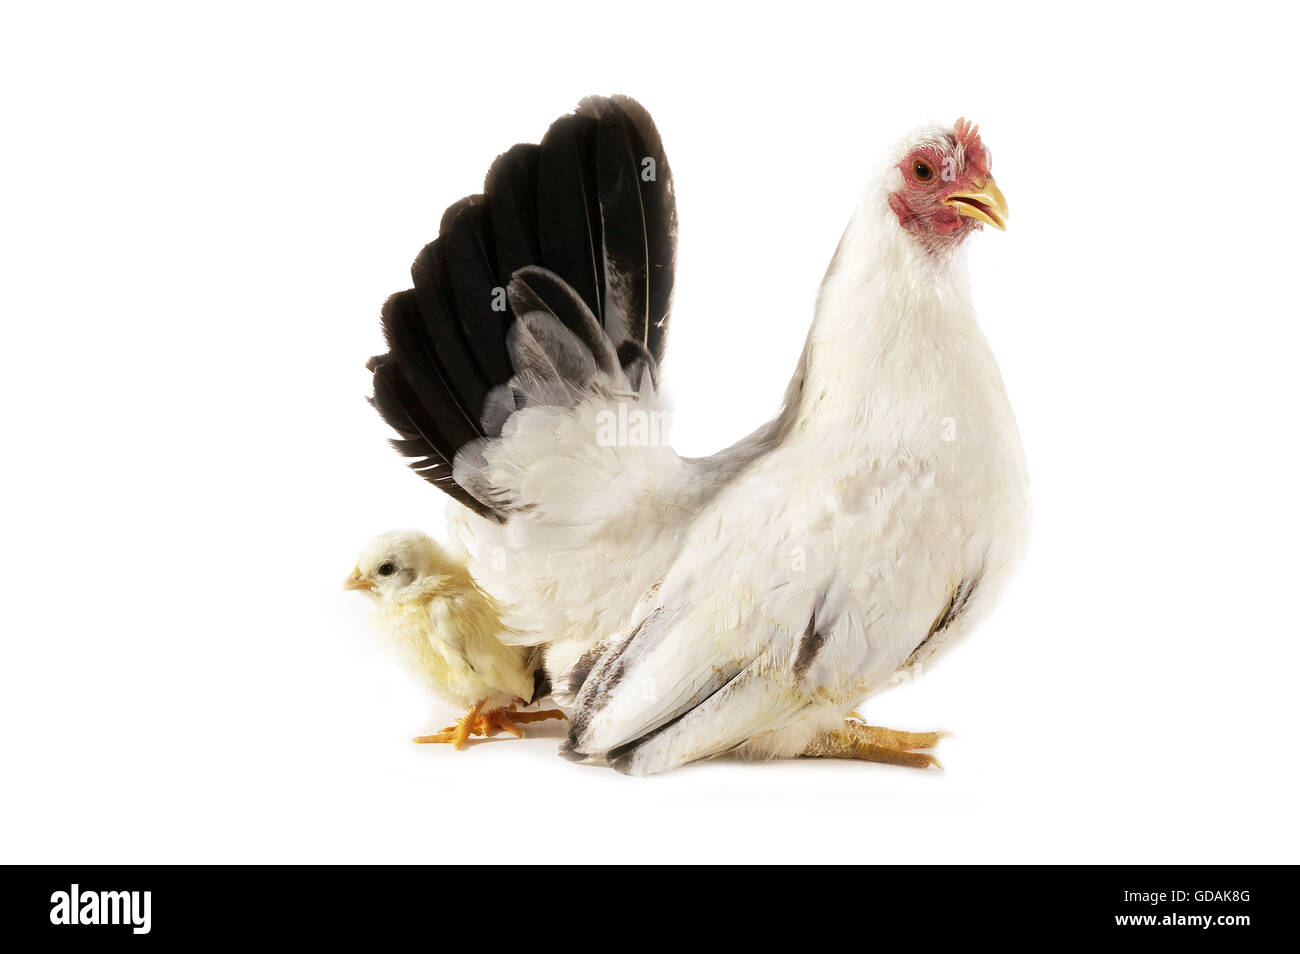 NAGASAKI DOMESTIC CHICKEN, HEN WITH CHICK AGAINST WHITE BACKGROUND Stock Photo